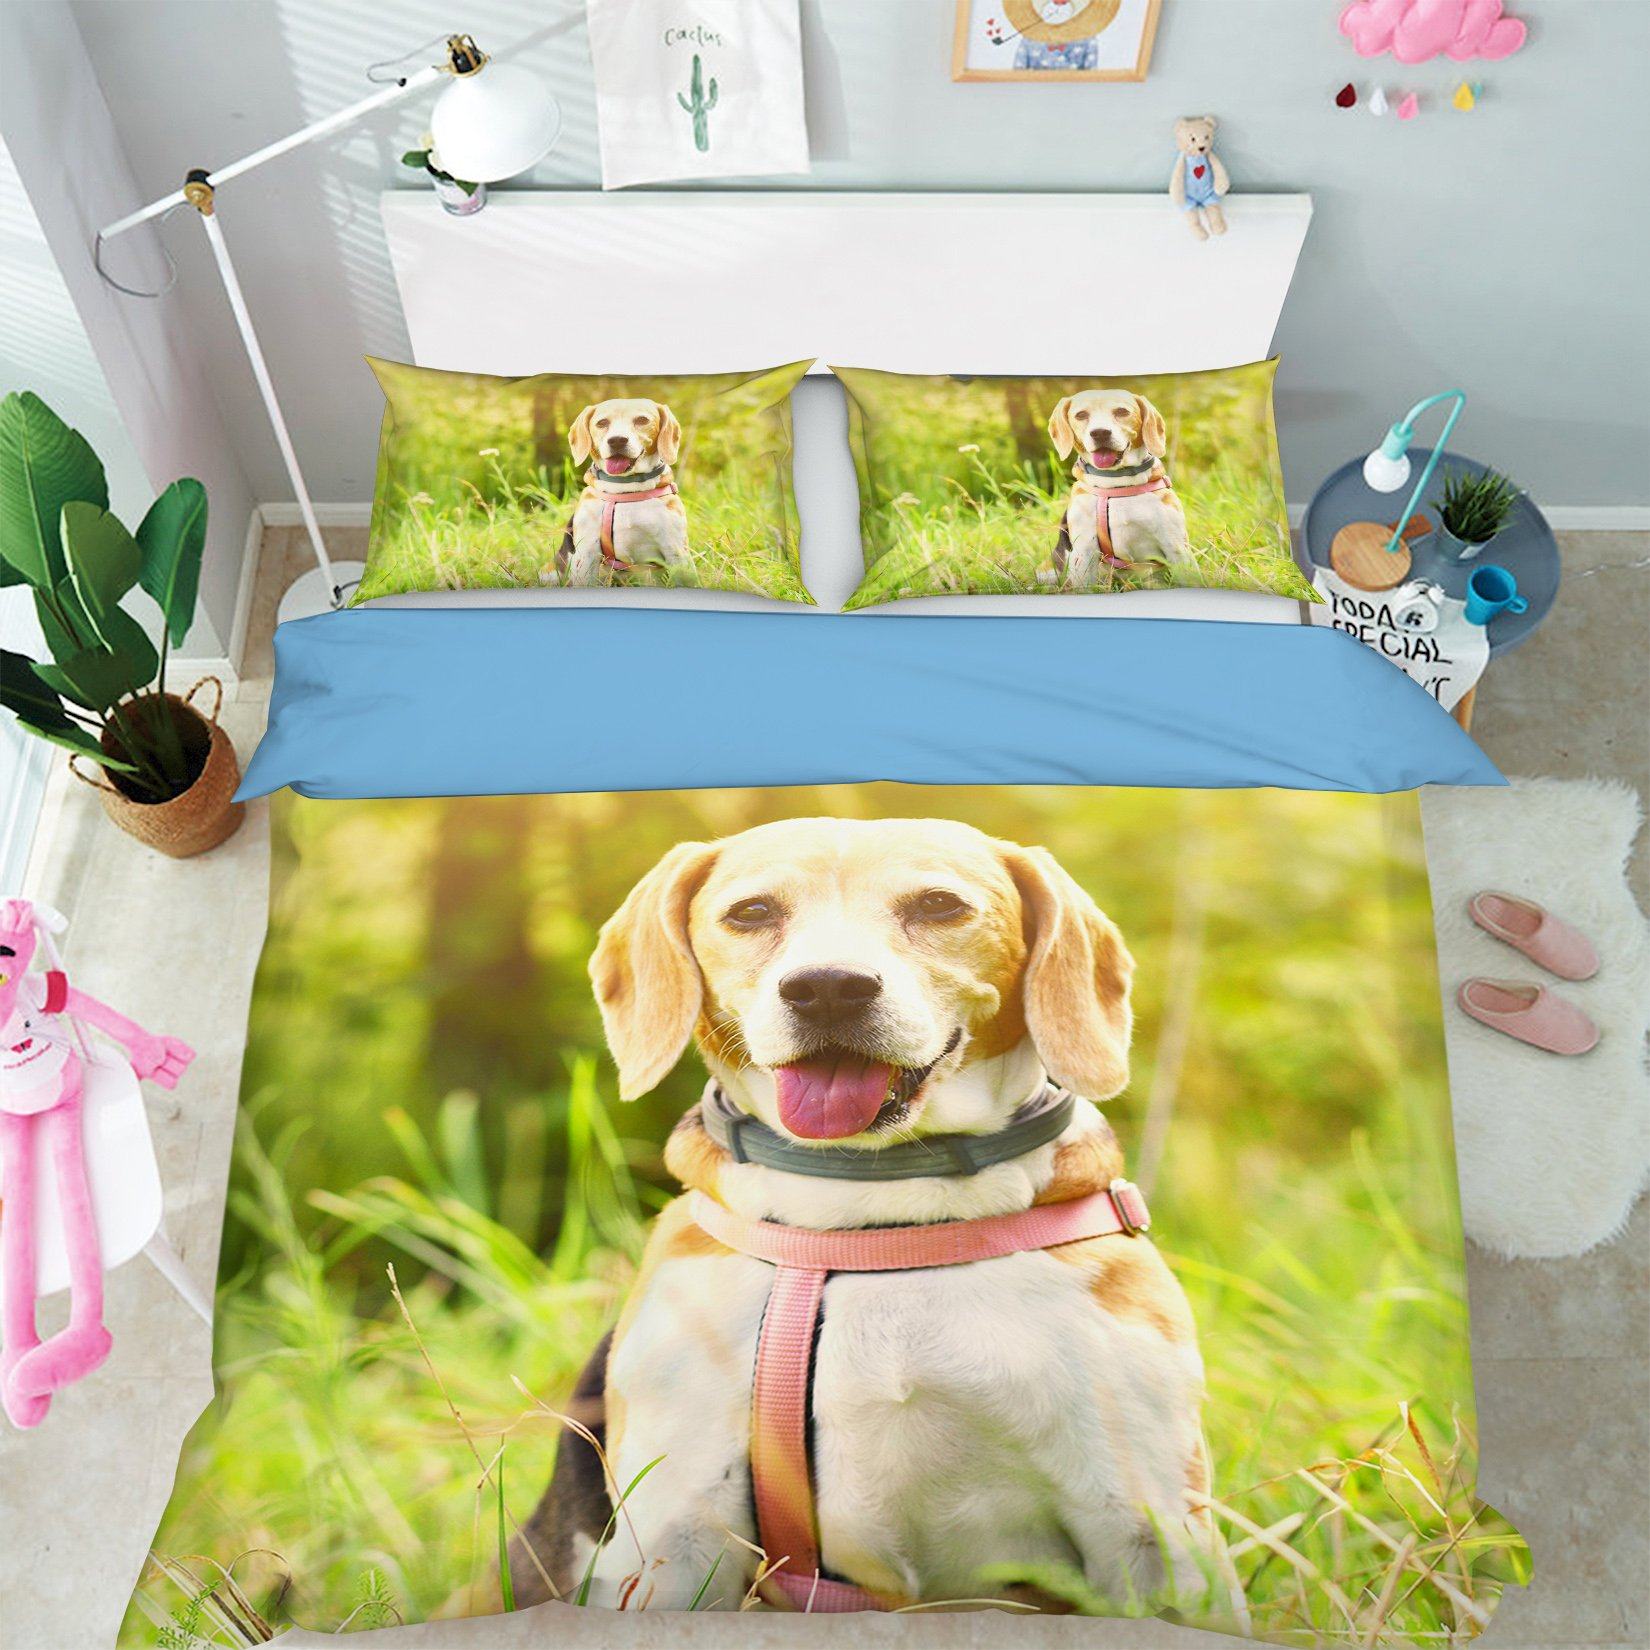 3D Sunshine Puppy 1950 Bed Pillowcases Quilt Quiet Covers AJ Creativity Home 